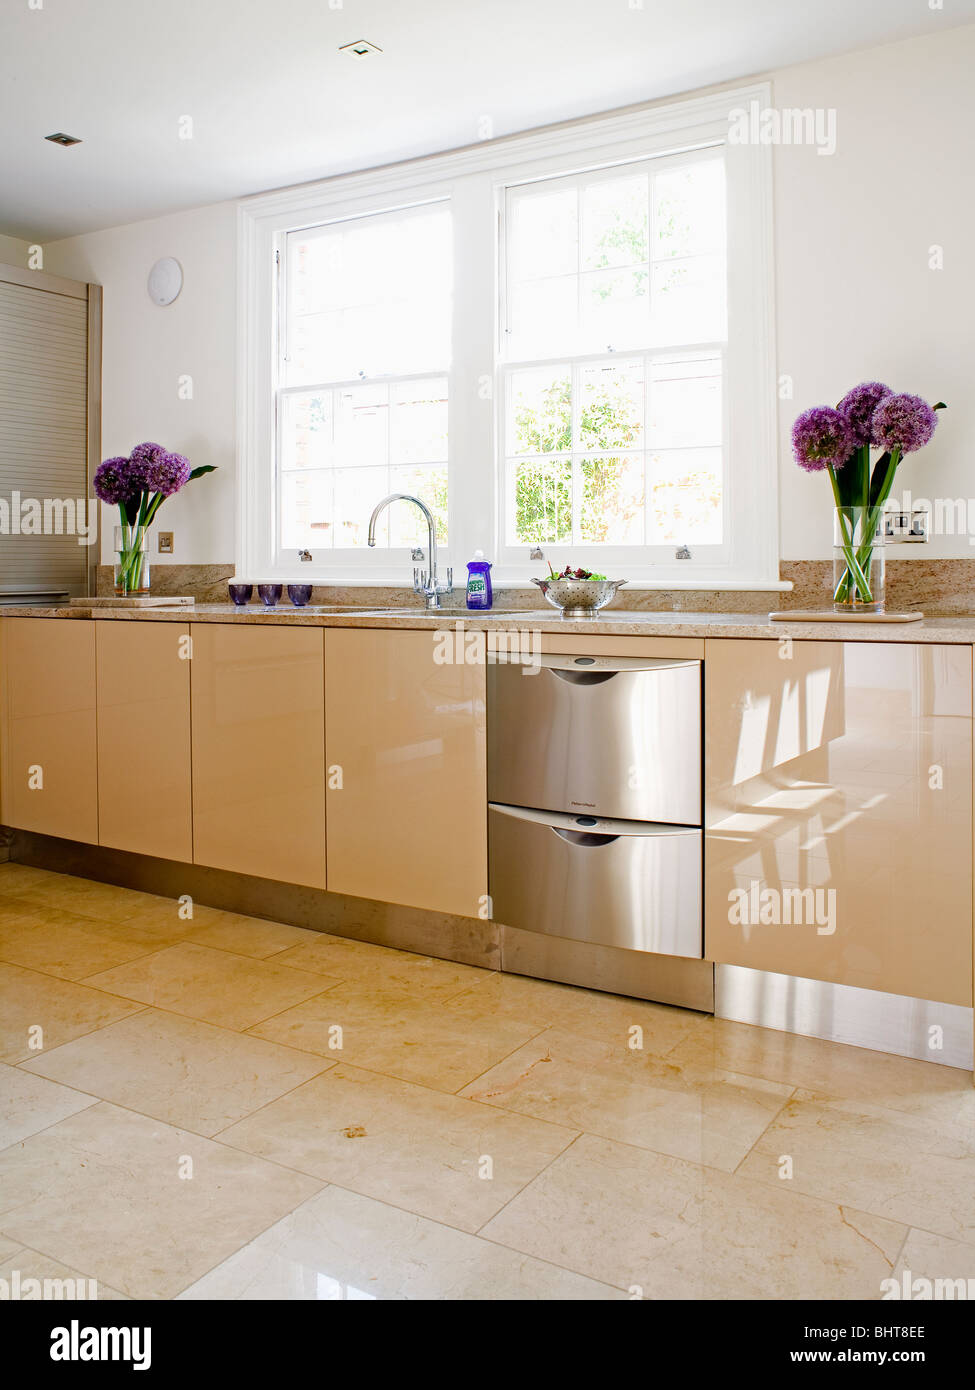 Stainless Steel Dishwasher In Pale Wood Fitted Unit In